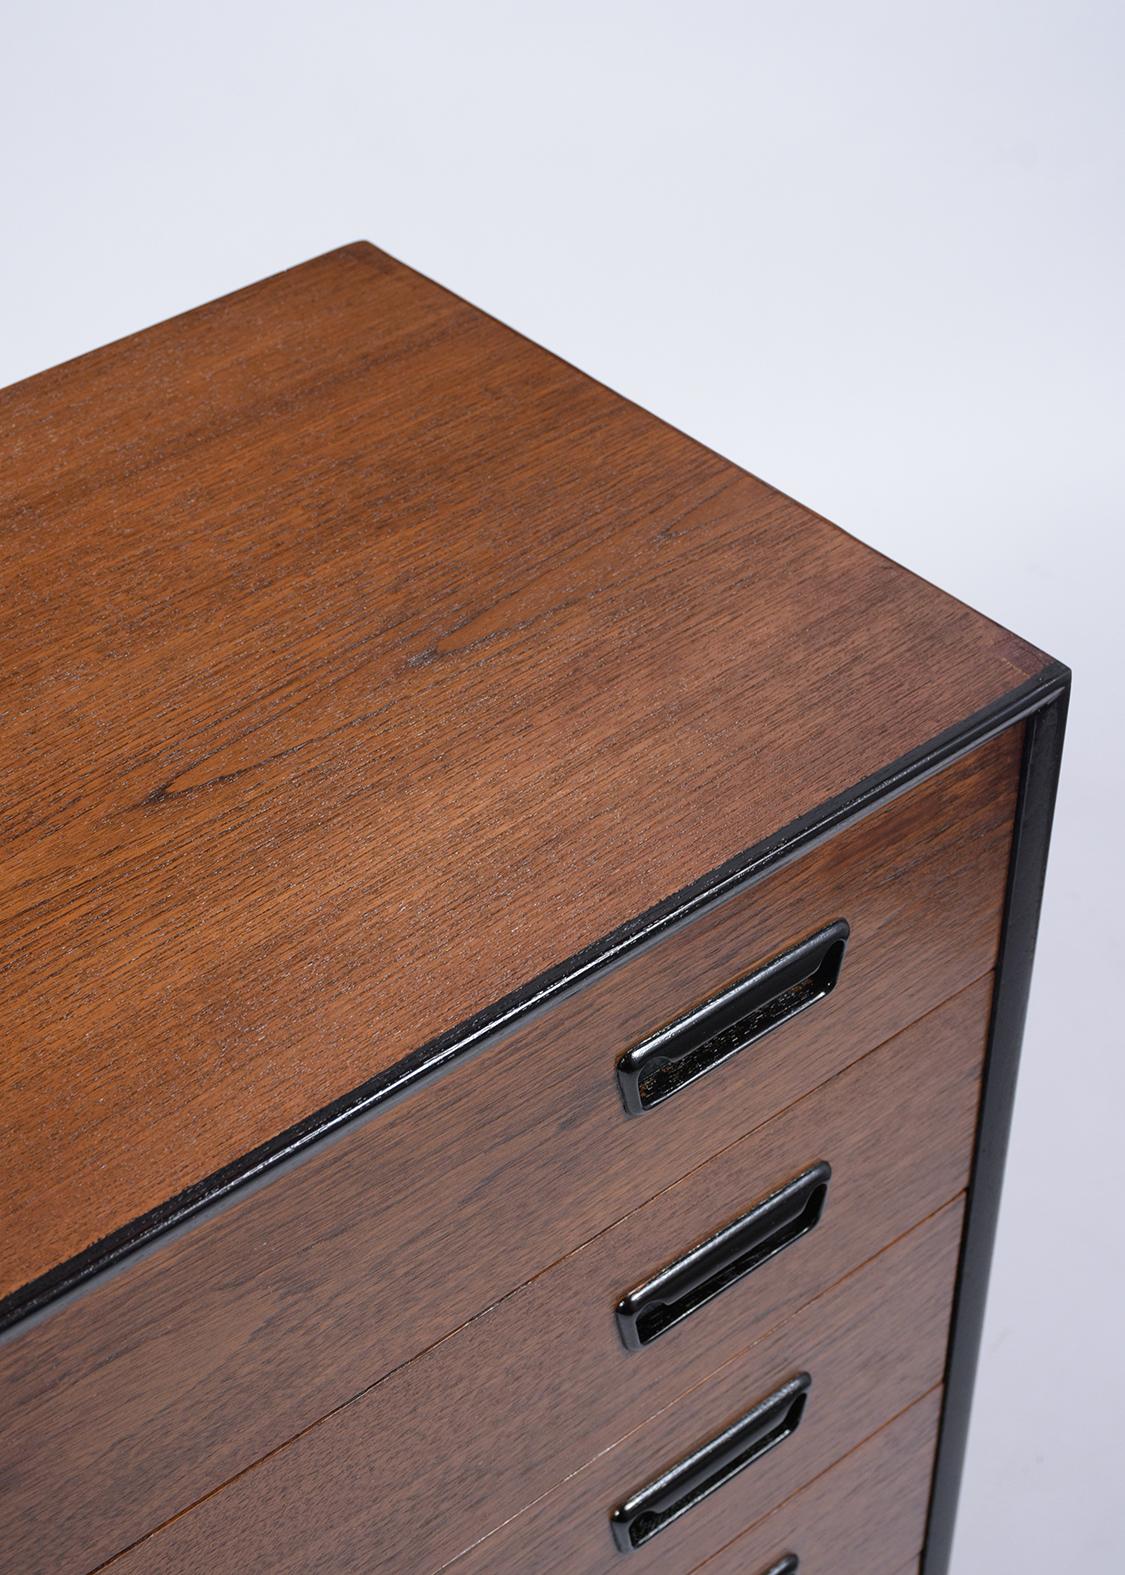 Lacquer 1960s Mid-Century Modern Danish Teak Wood Chest of Drawers with Ebonized Accents